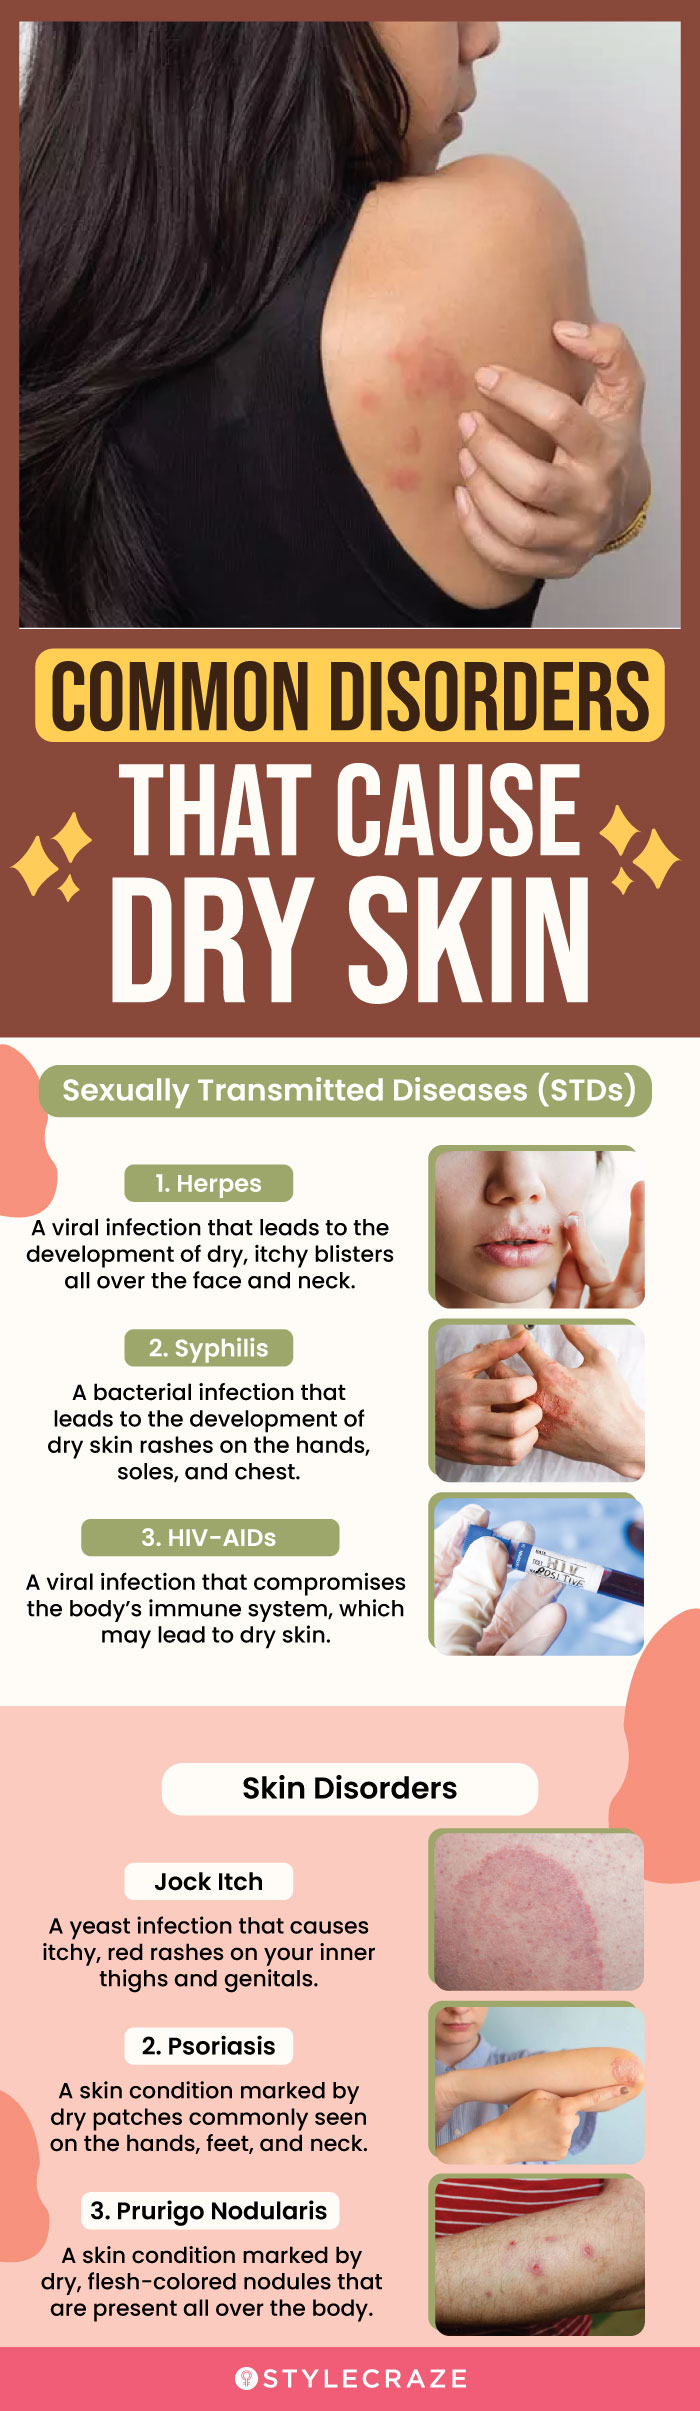 common disorders that cause dry skin (infographic)